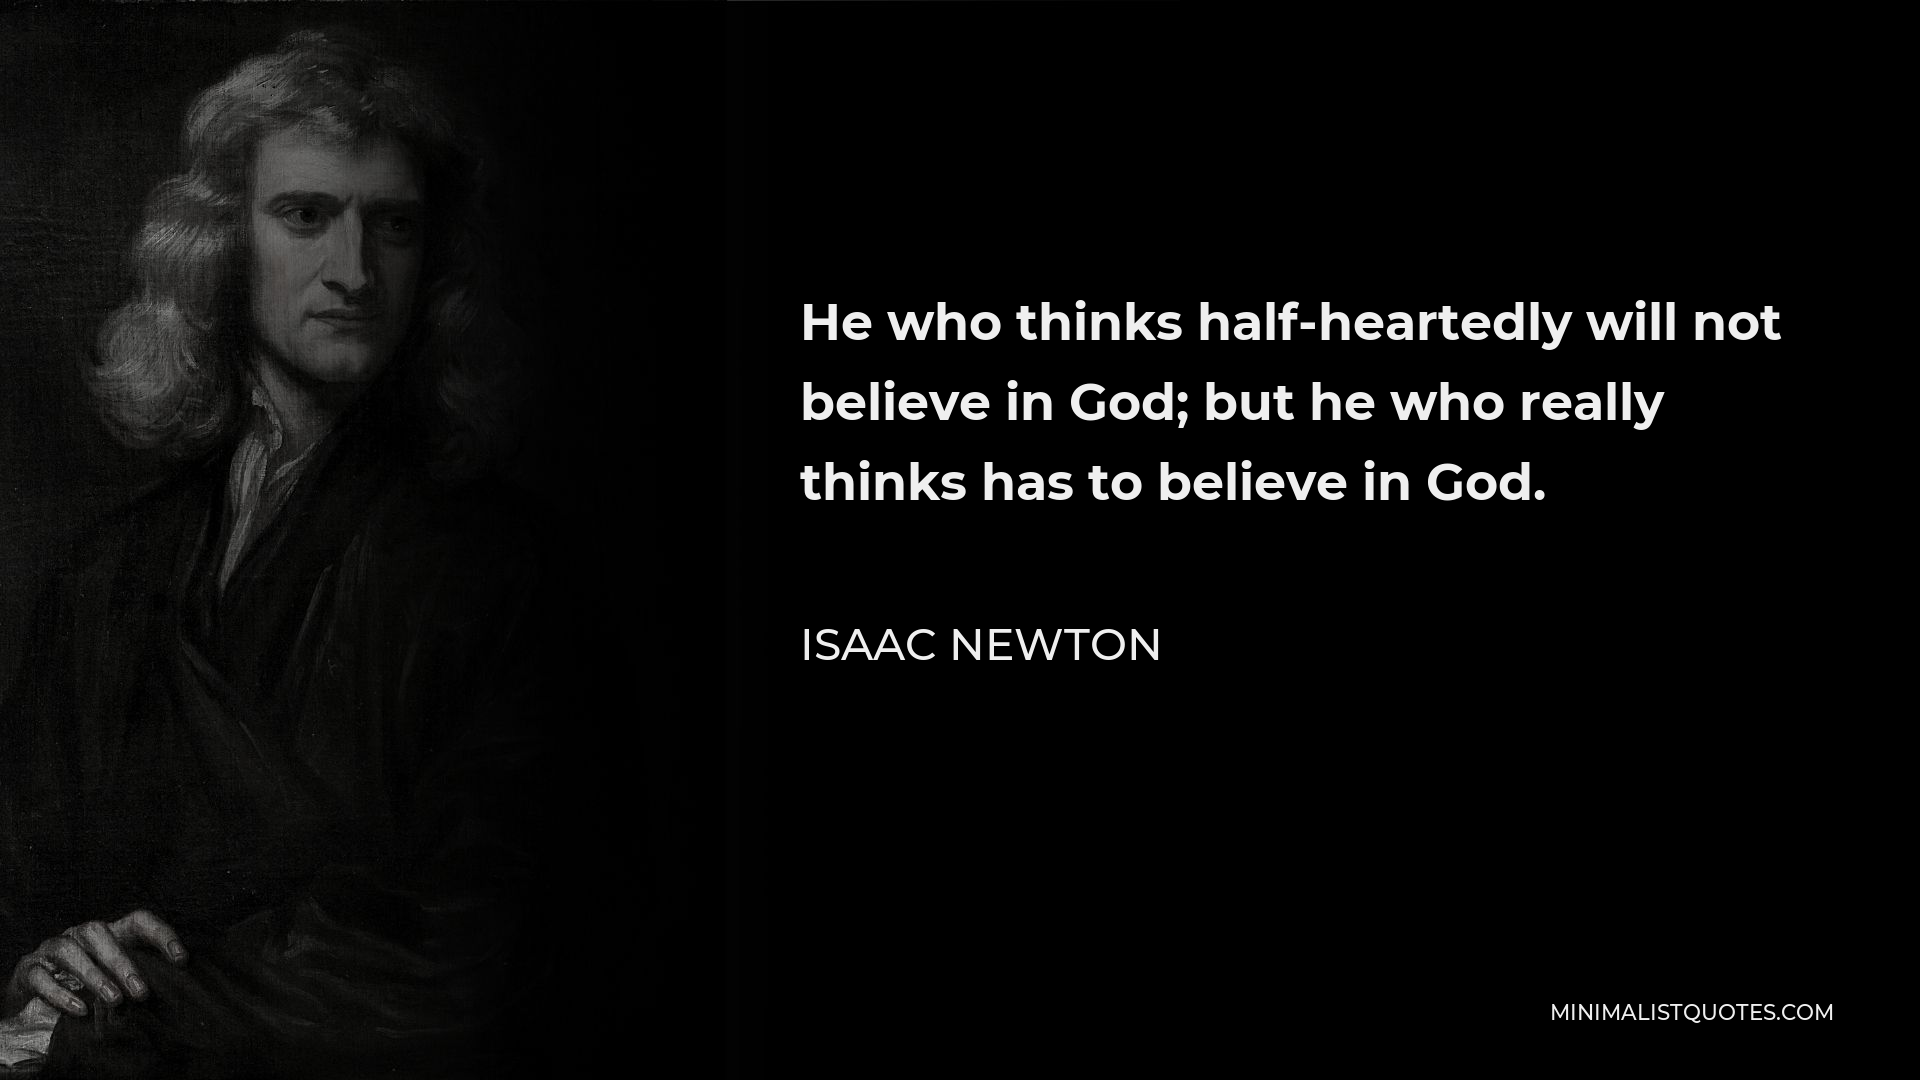 Isaac Newton Quote He Who Thinks Half Heartedly Will Not Believe In God But He Who Really 6123